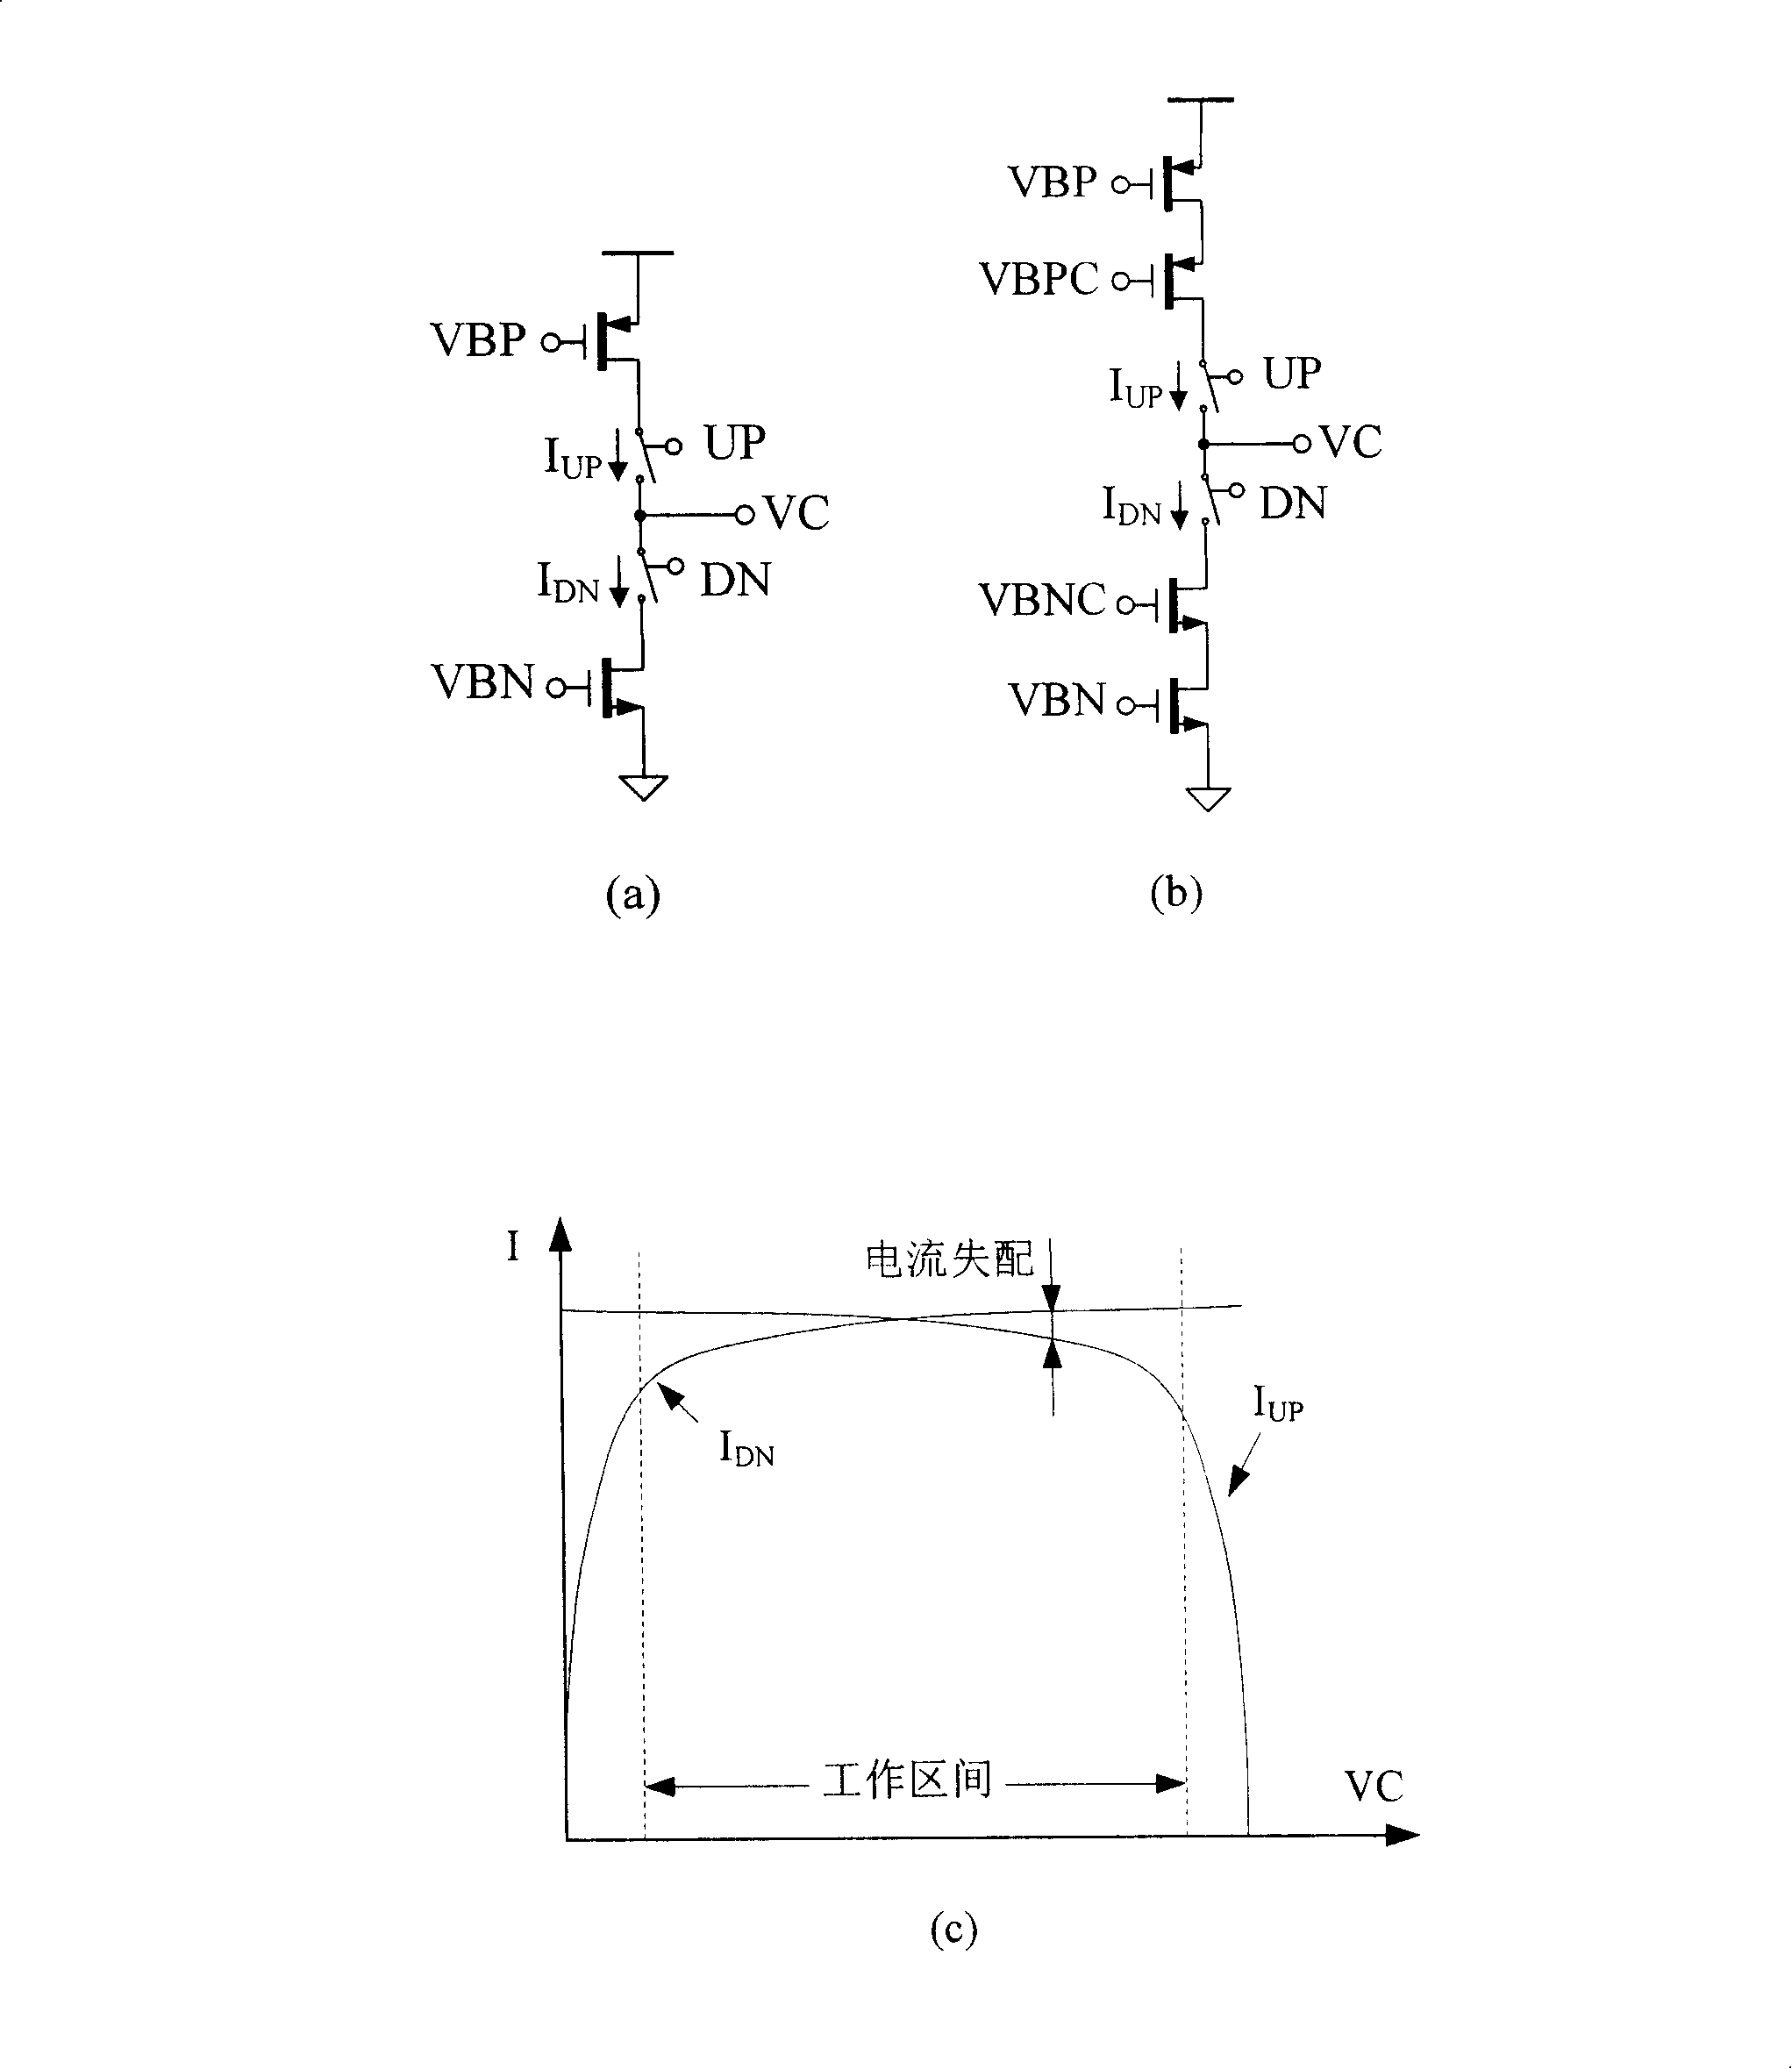 Self-calibration charge pump circuit used for phase-locked loop and its self-calibration feedback loop